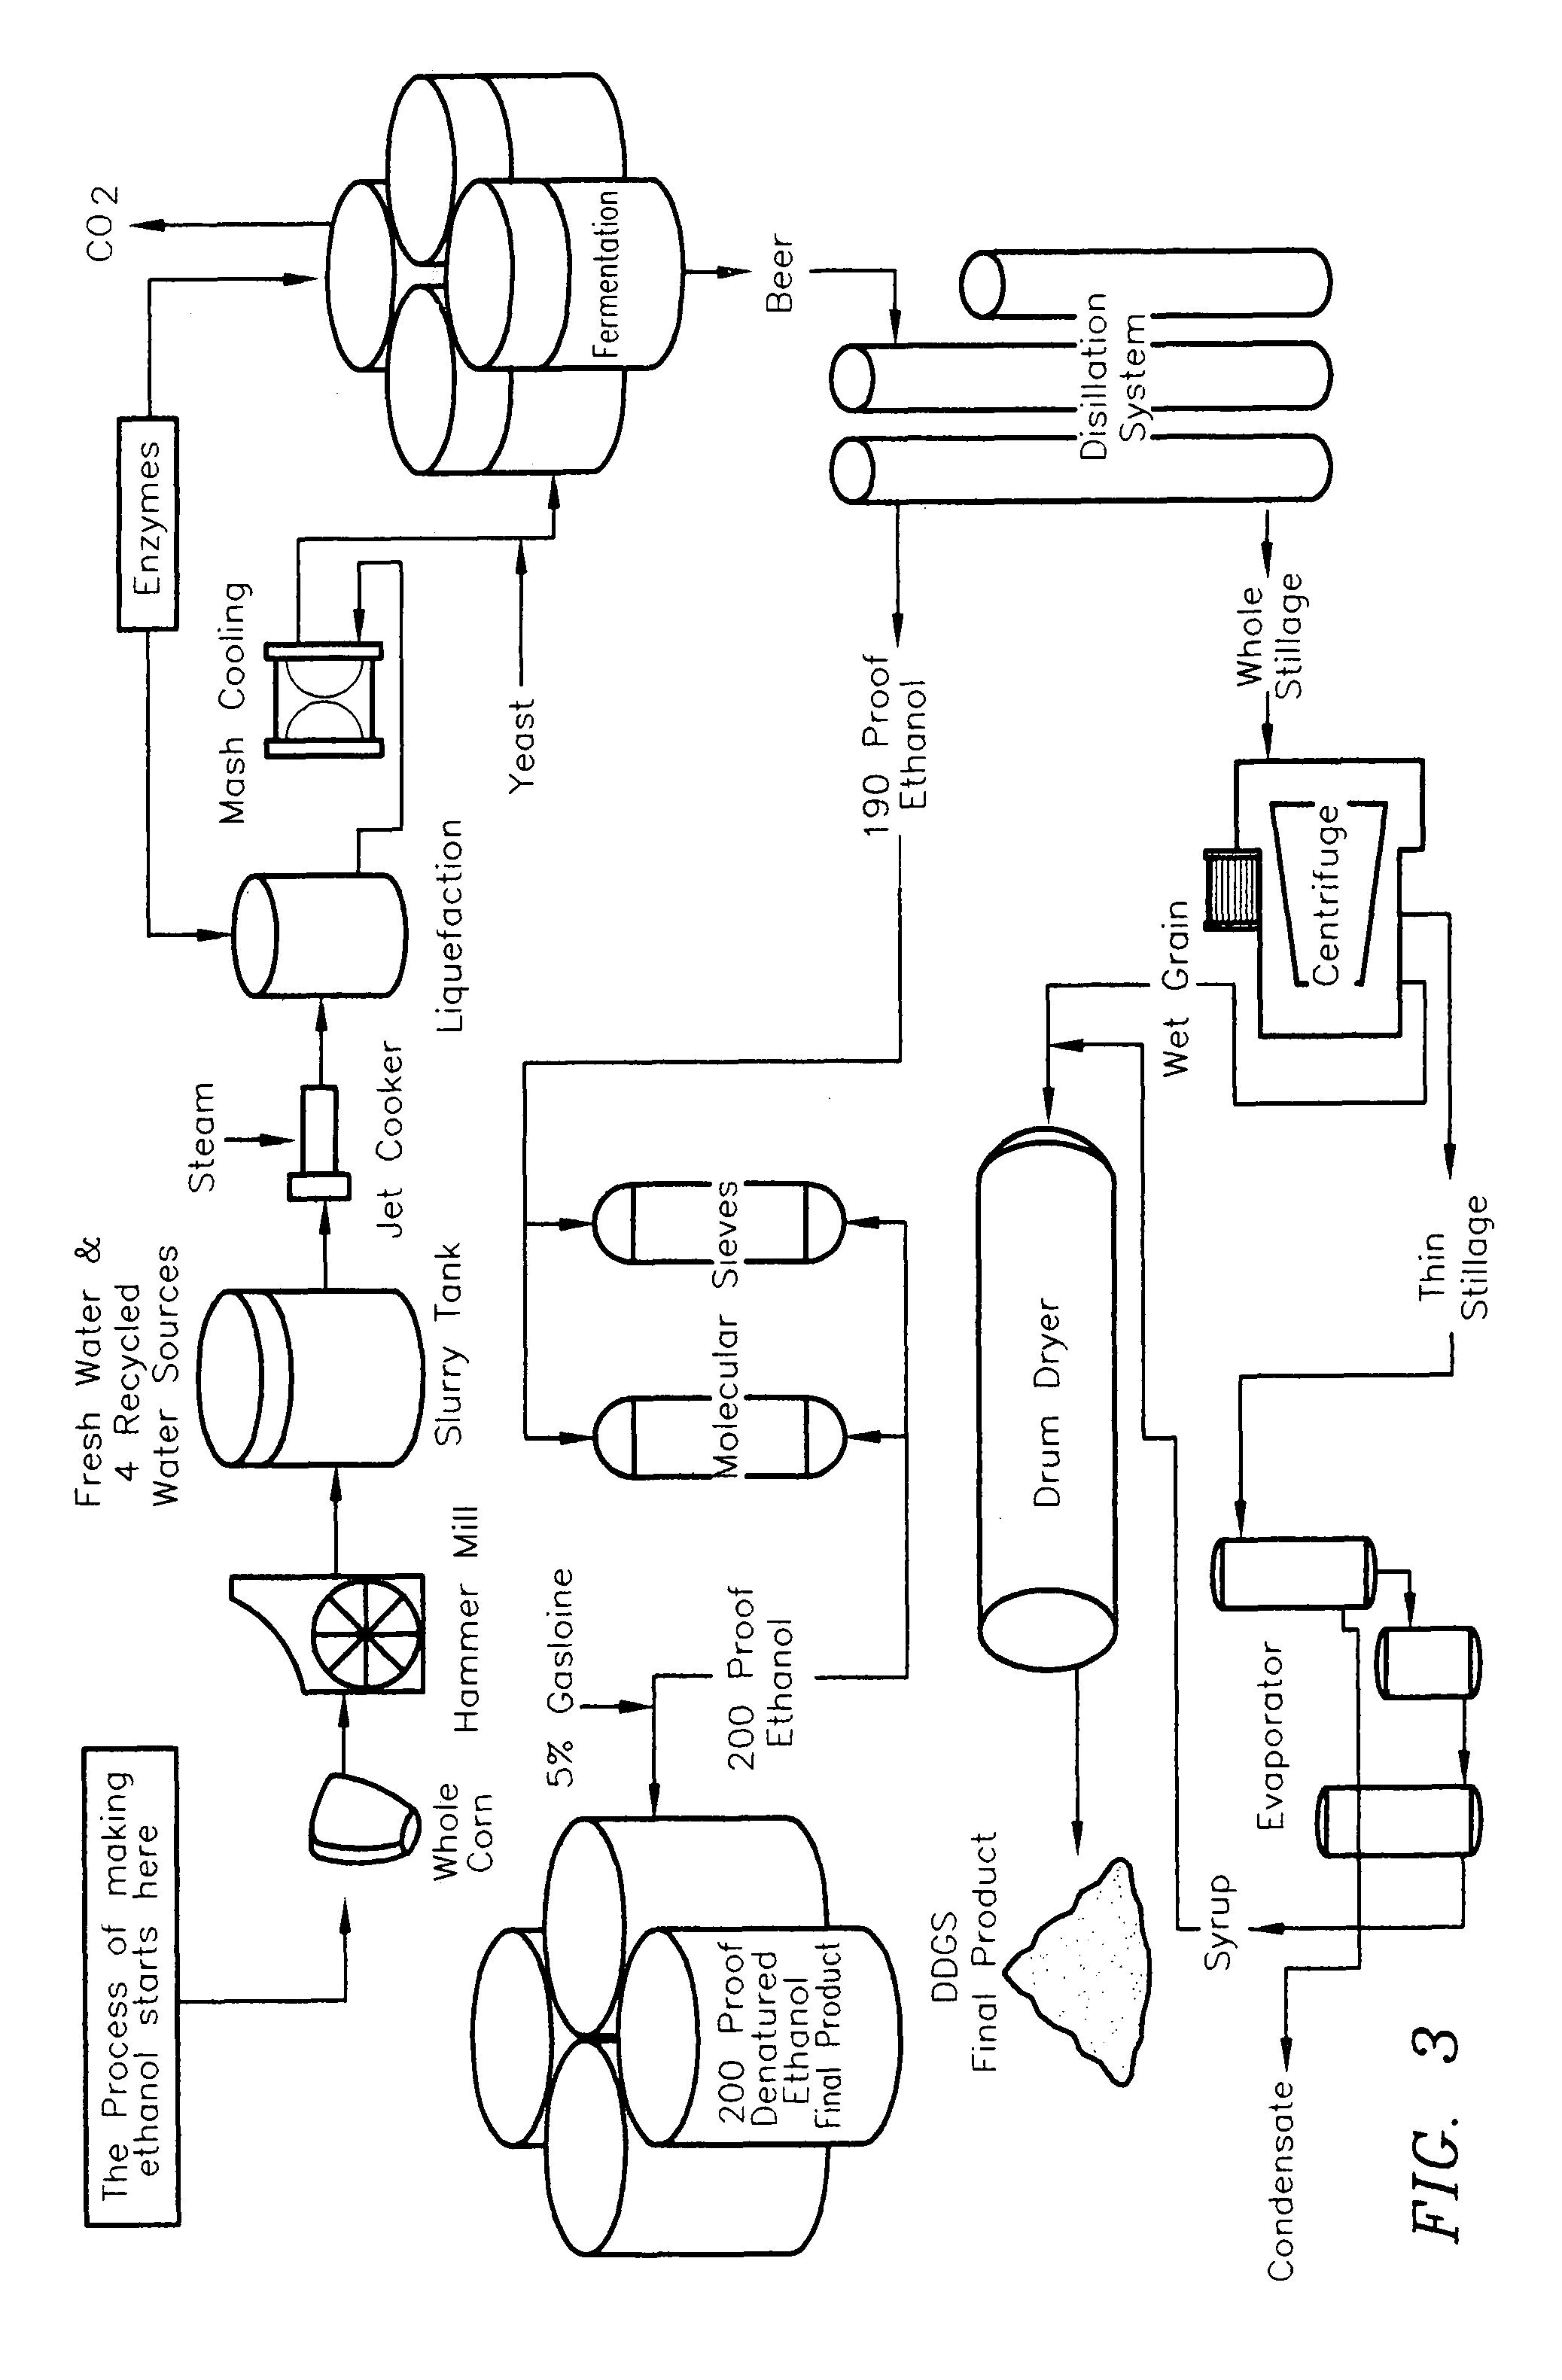 System and method for isolation of gluten as a co-product of ethanol production